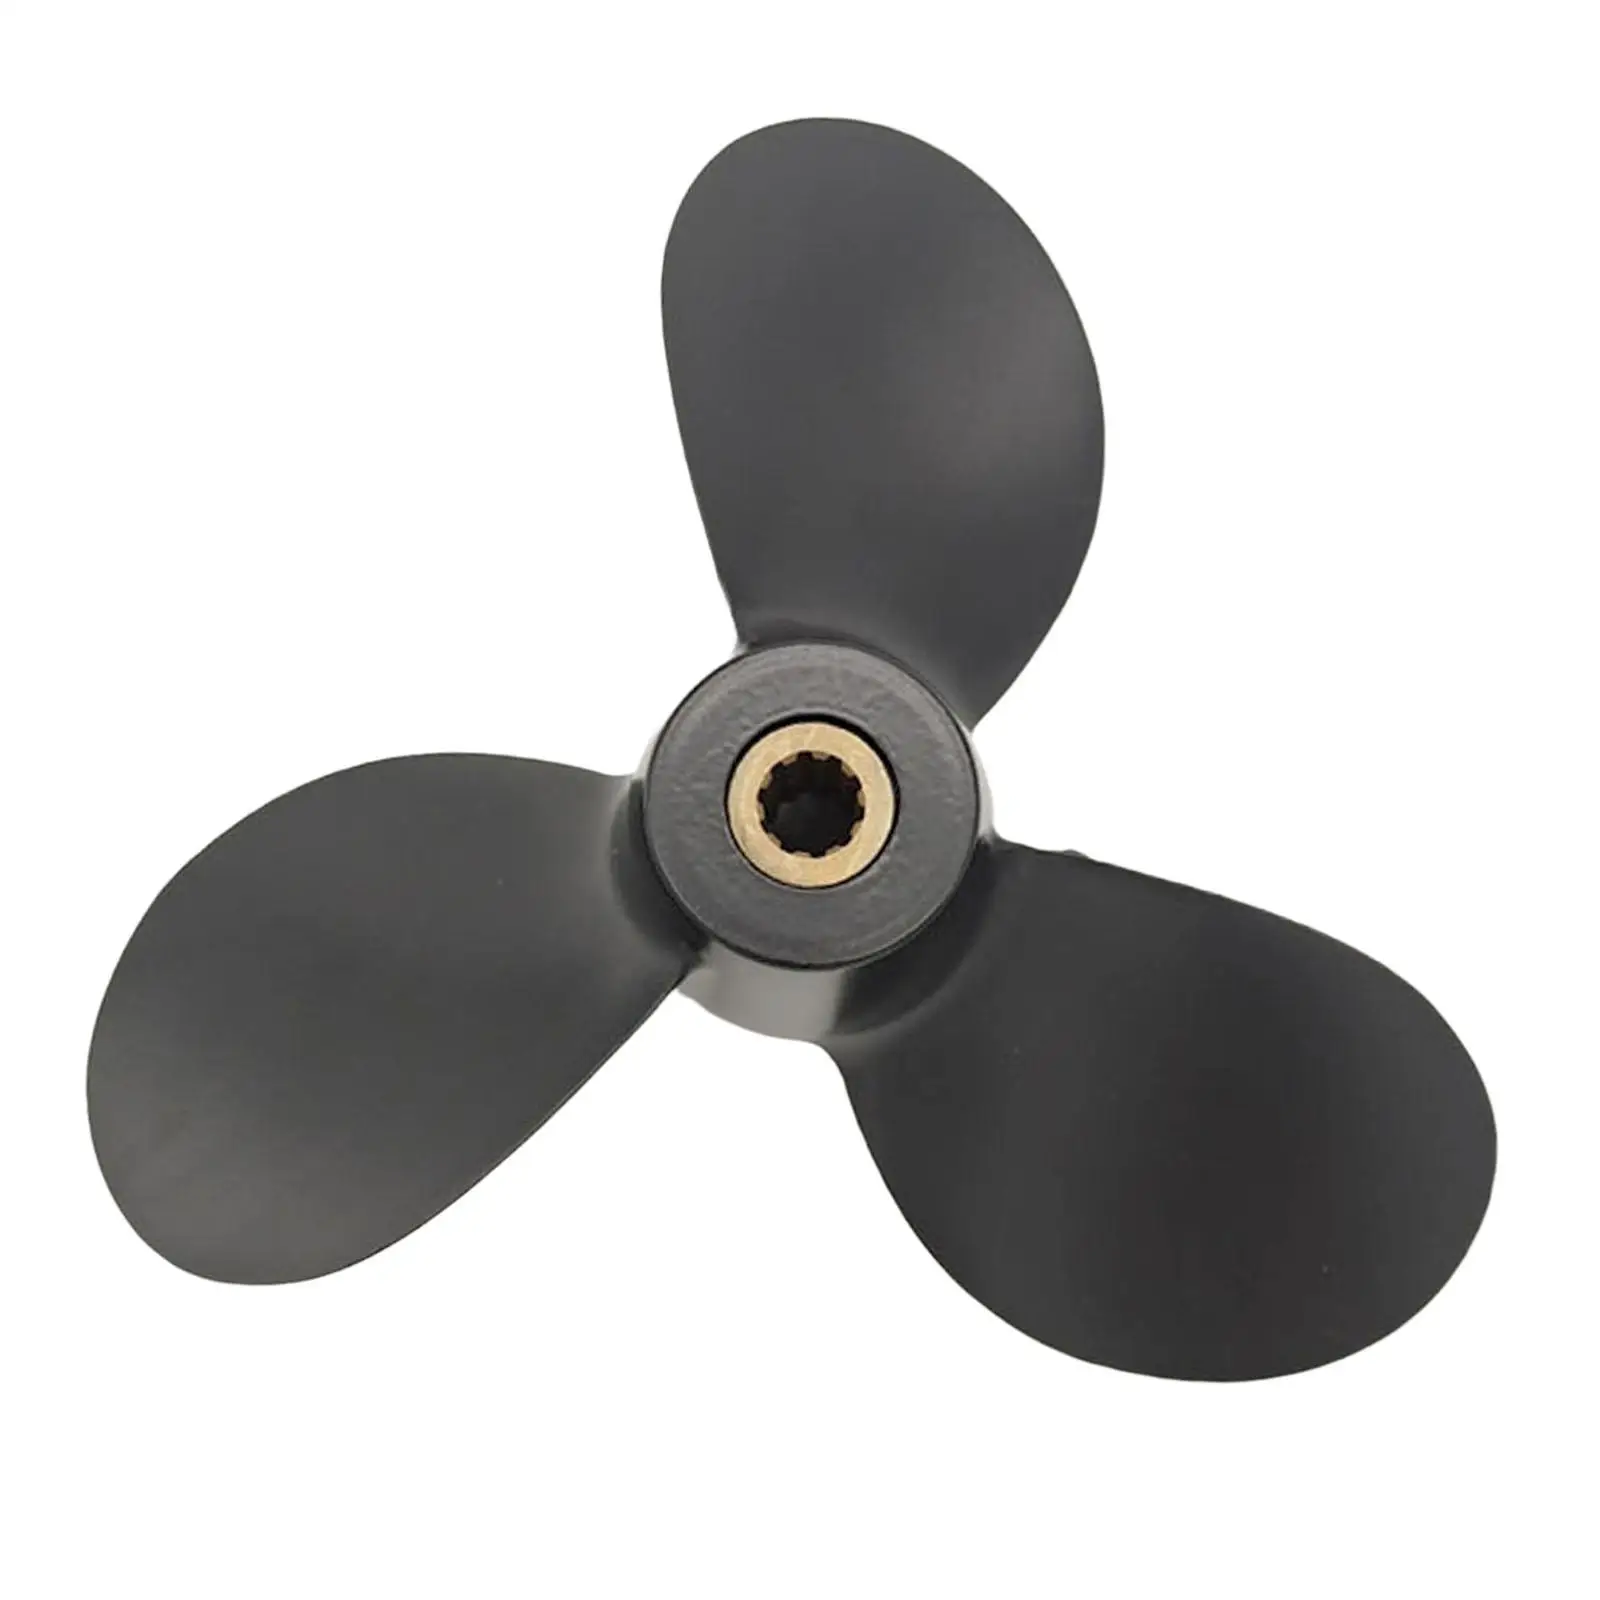 Marine Propeller 7 1/2x7 58111-98651-019 Replaces Accessories Easily Install Ten